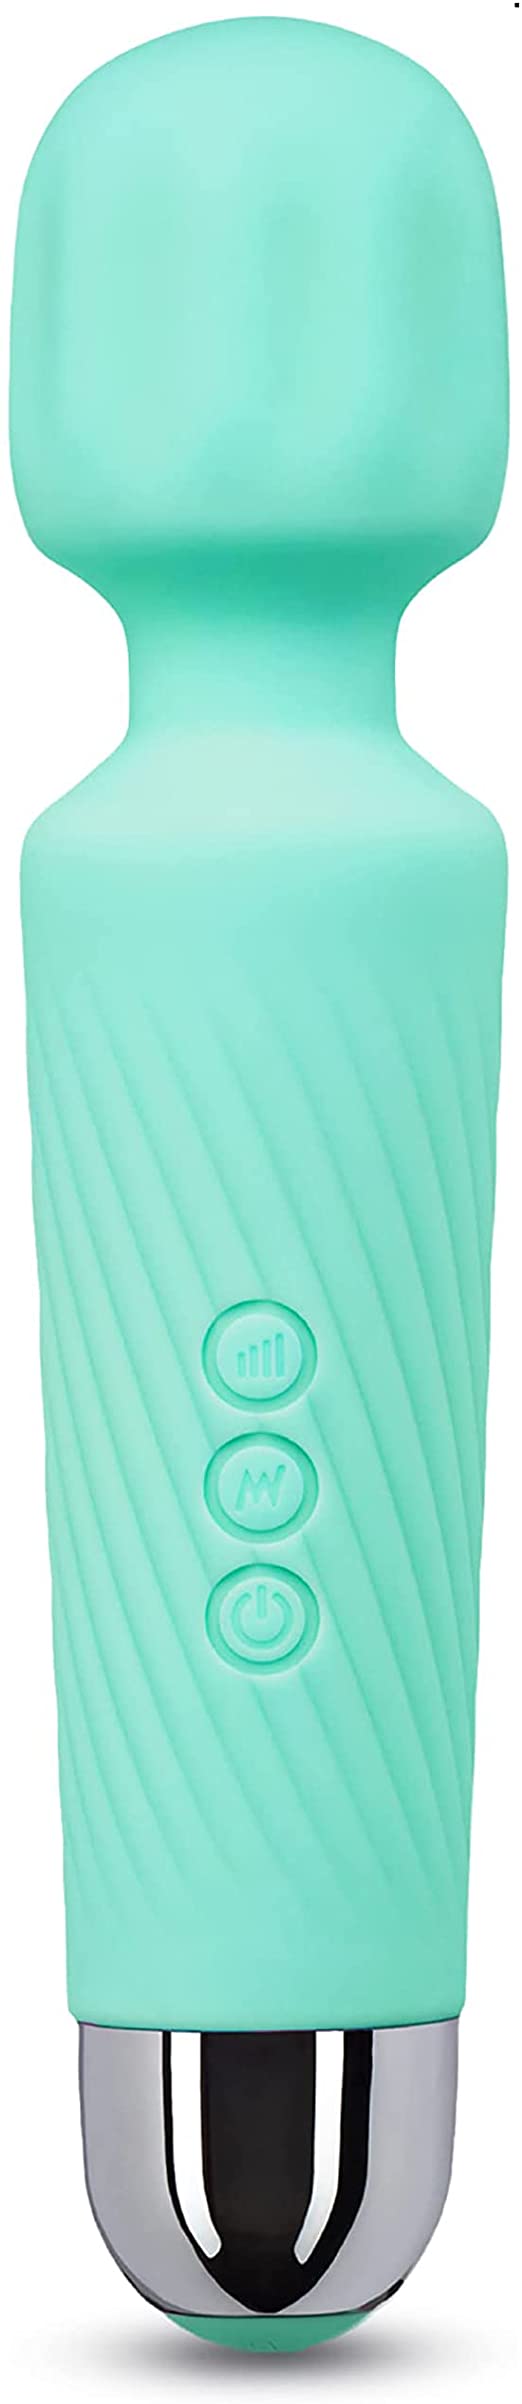 Rechargeable Personal Massager - Quiet & Waterproof - 20 Patterns & 8 Speeds - Travel Bag Included - Men & Women - Perfect for Tension Relief, Muscle, Back, Soreness, Recovery - Mint Green